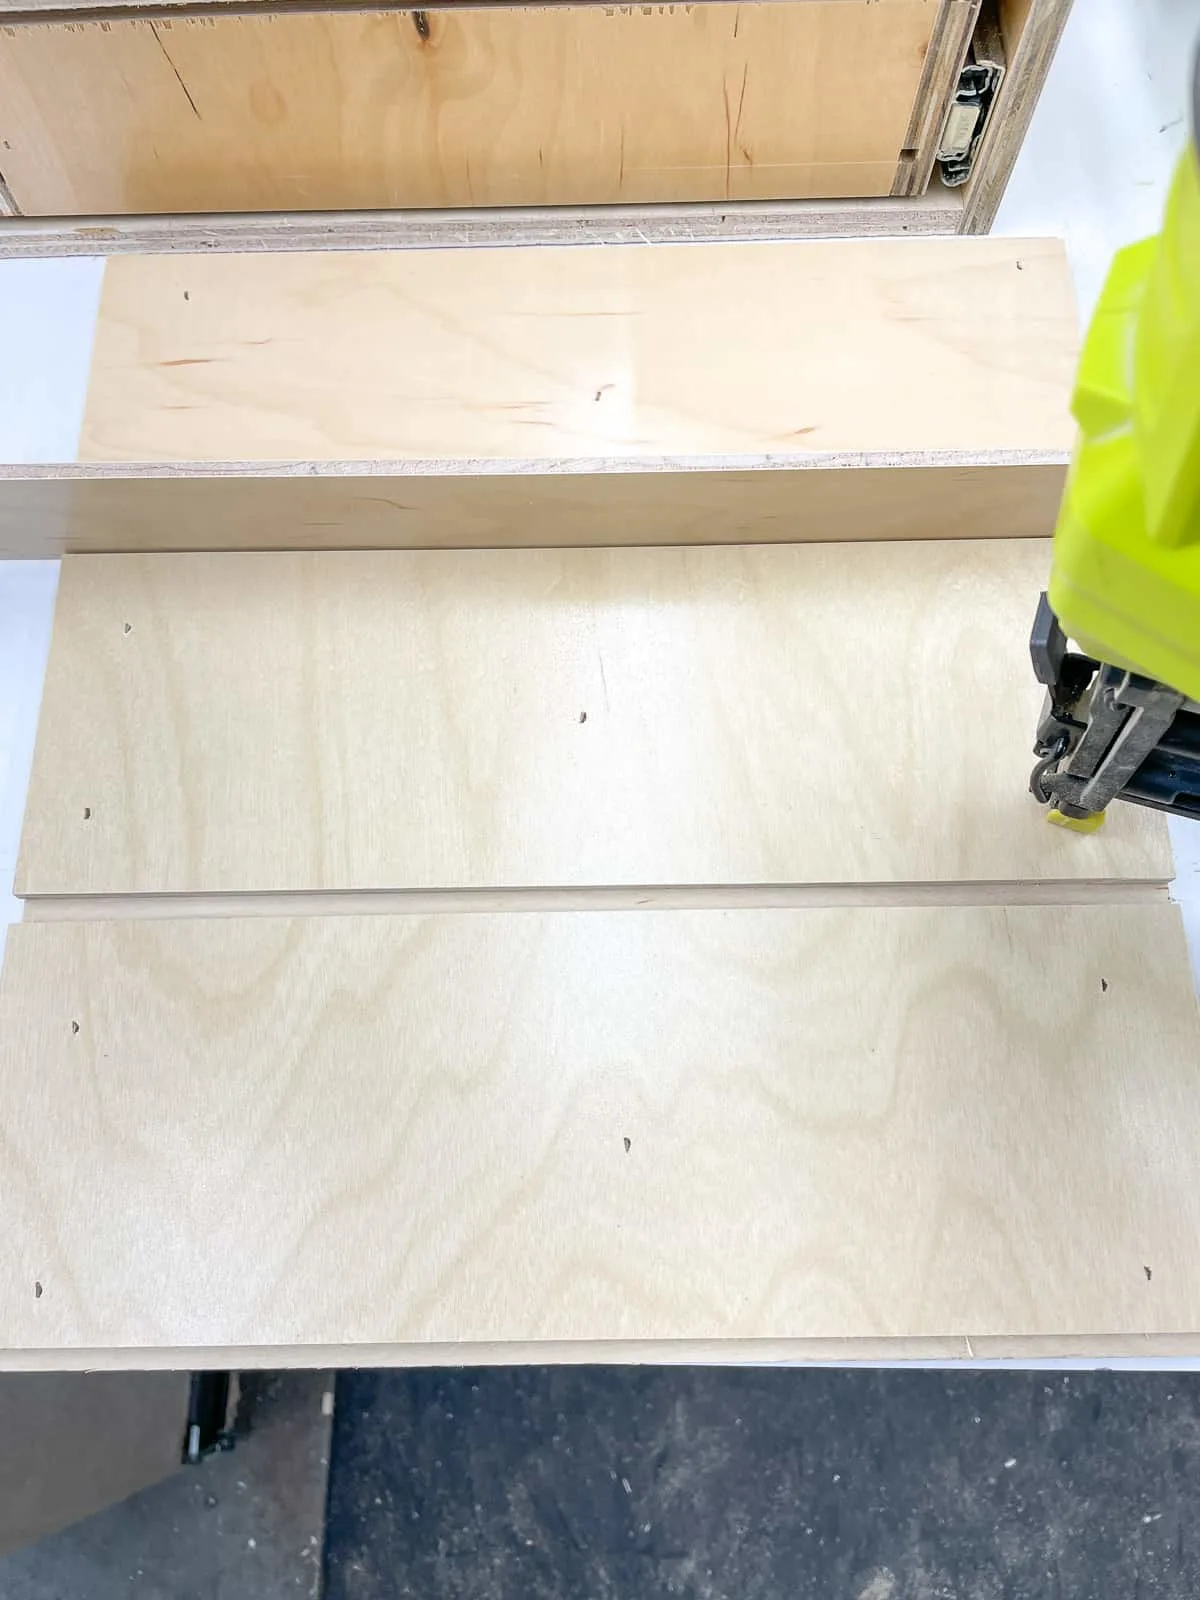 top of the nail gun storage box with grooves for dividers